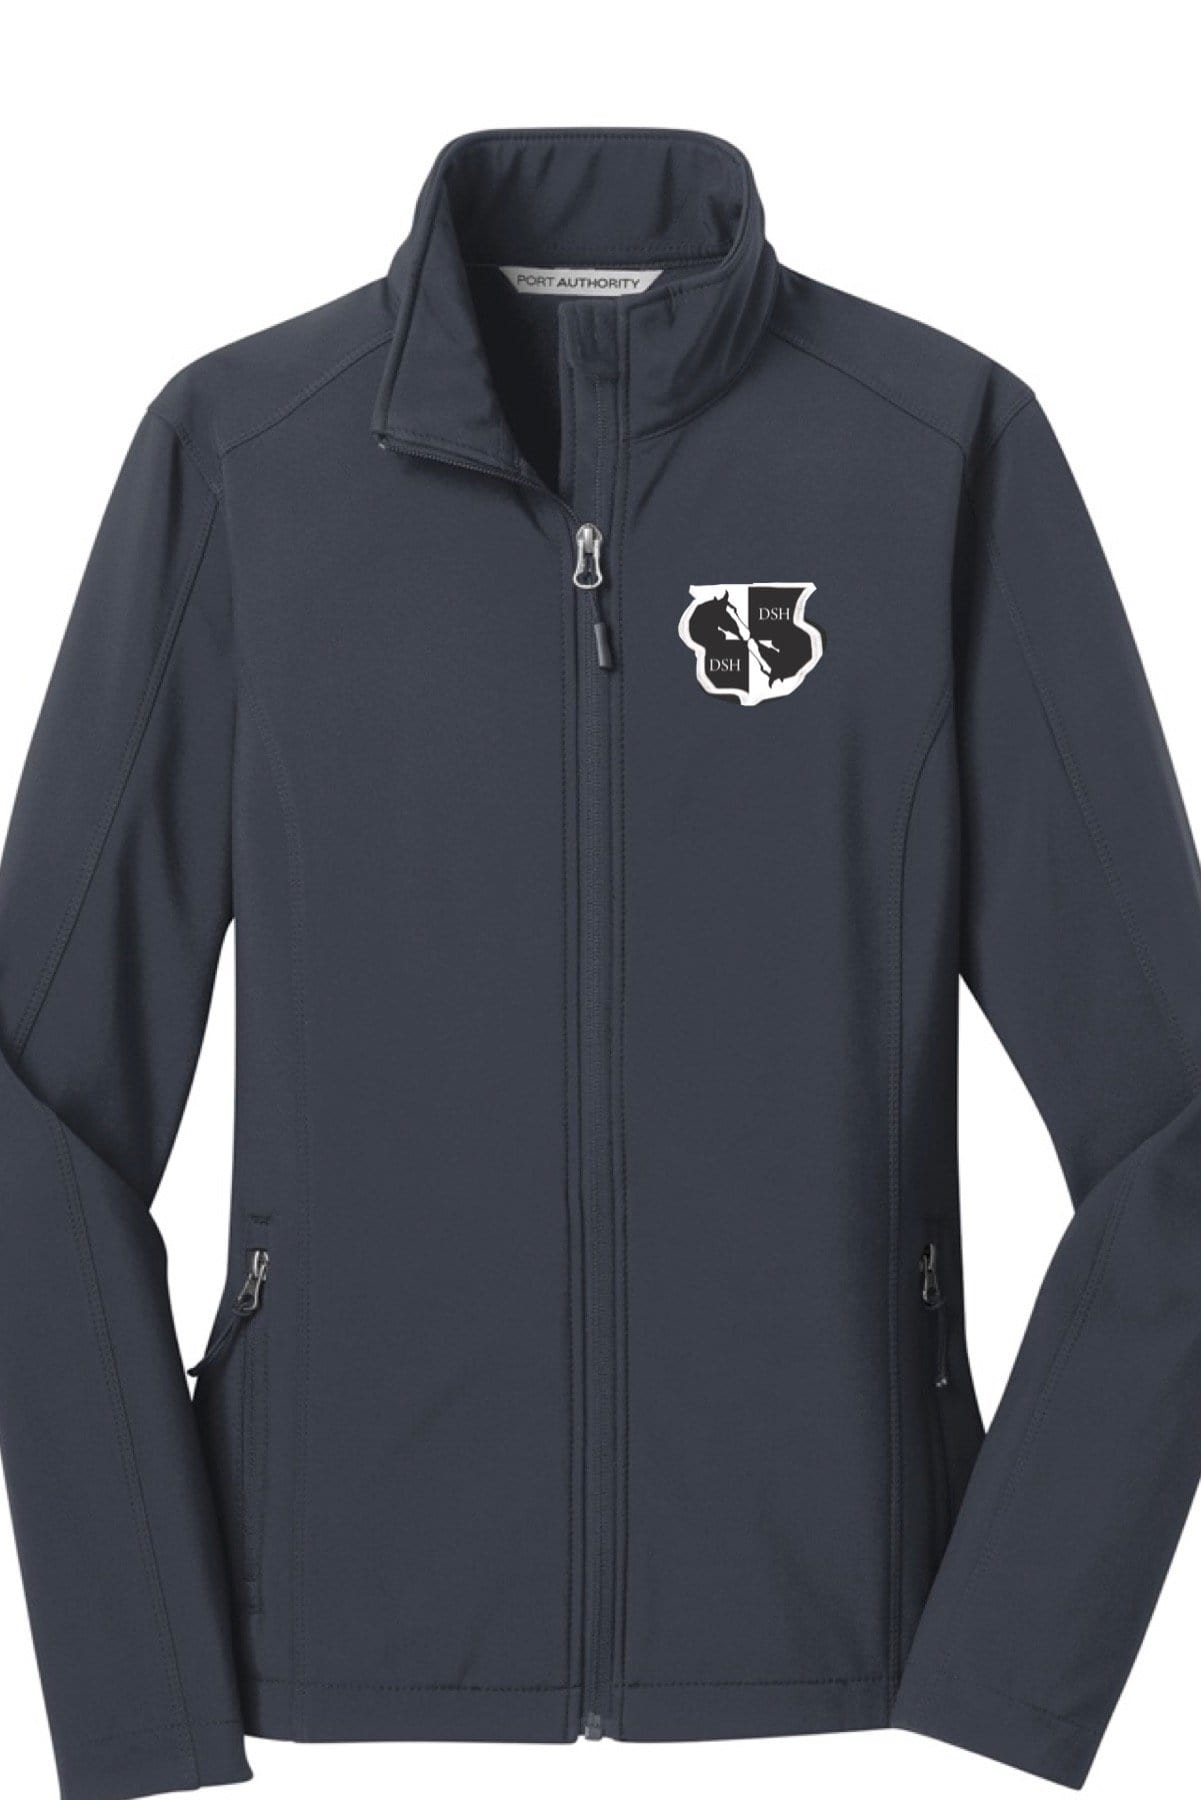 Equestrian Team Apparel Custom Team Jackets DSH Jackets equestrian team apparel online tack store mobile tack store custom farm apparel custom show stable clothing equestrian lifestyle horse show clothing riding clothes horses equestrian tack store